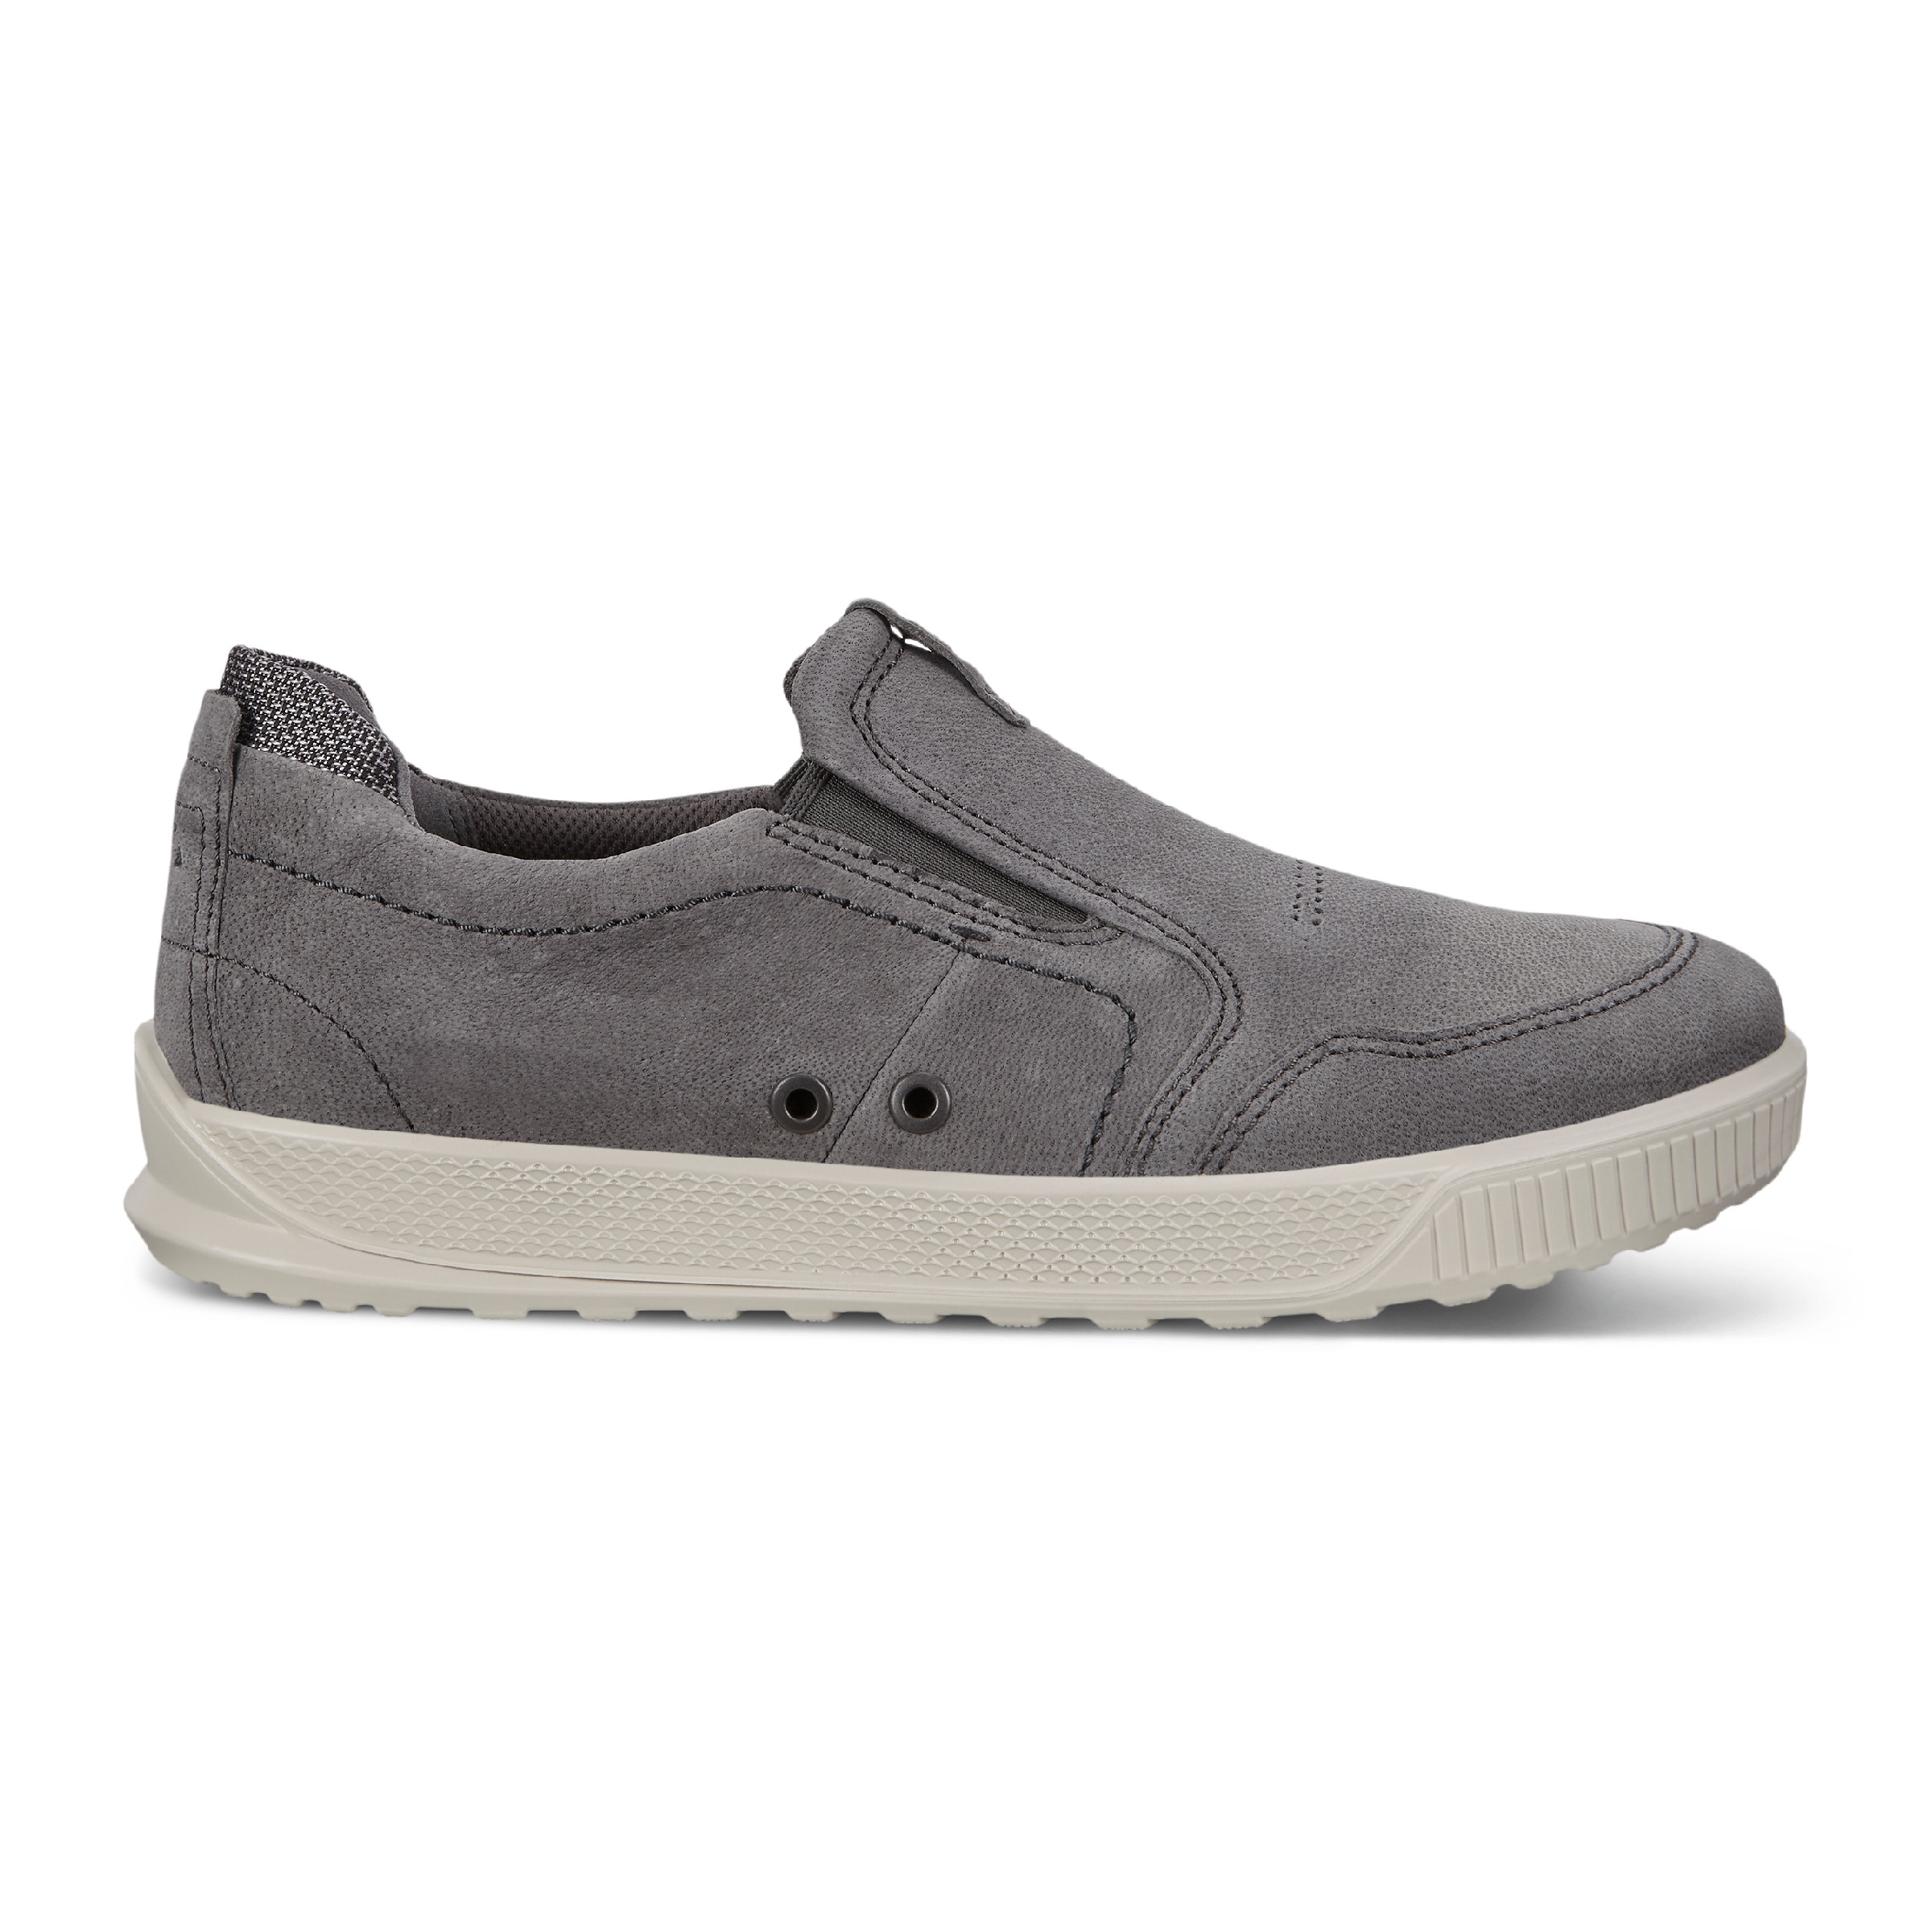 Ecco Mens Byway Grey Nubuk Slip-On shoe - County Shoes Dorchester